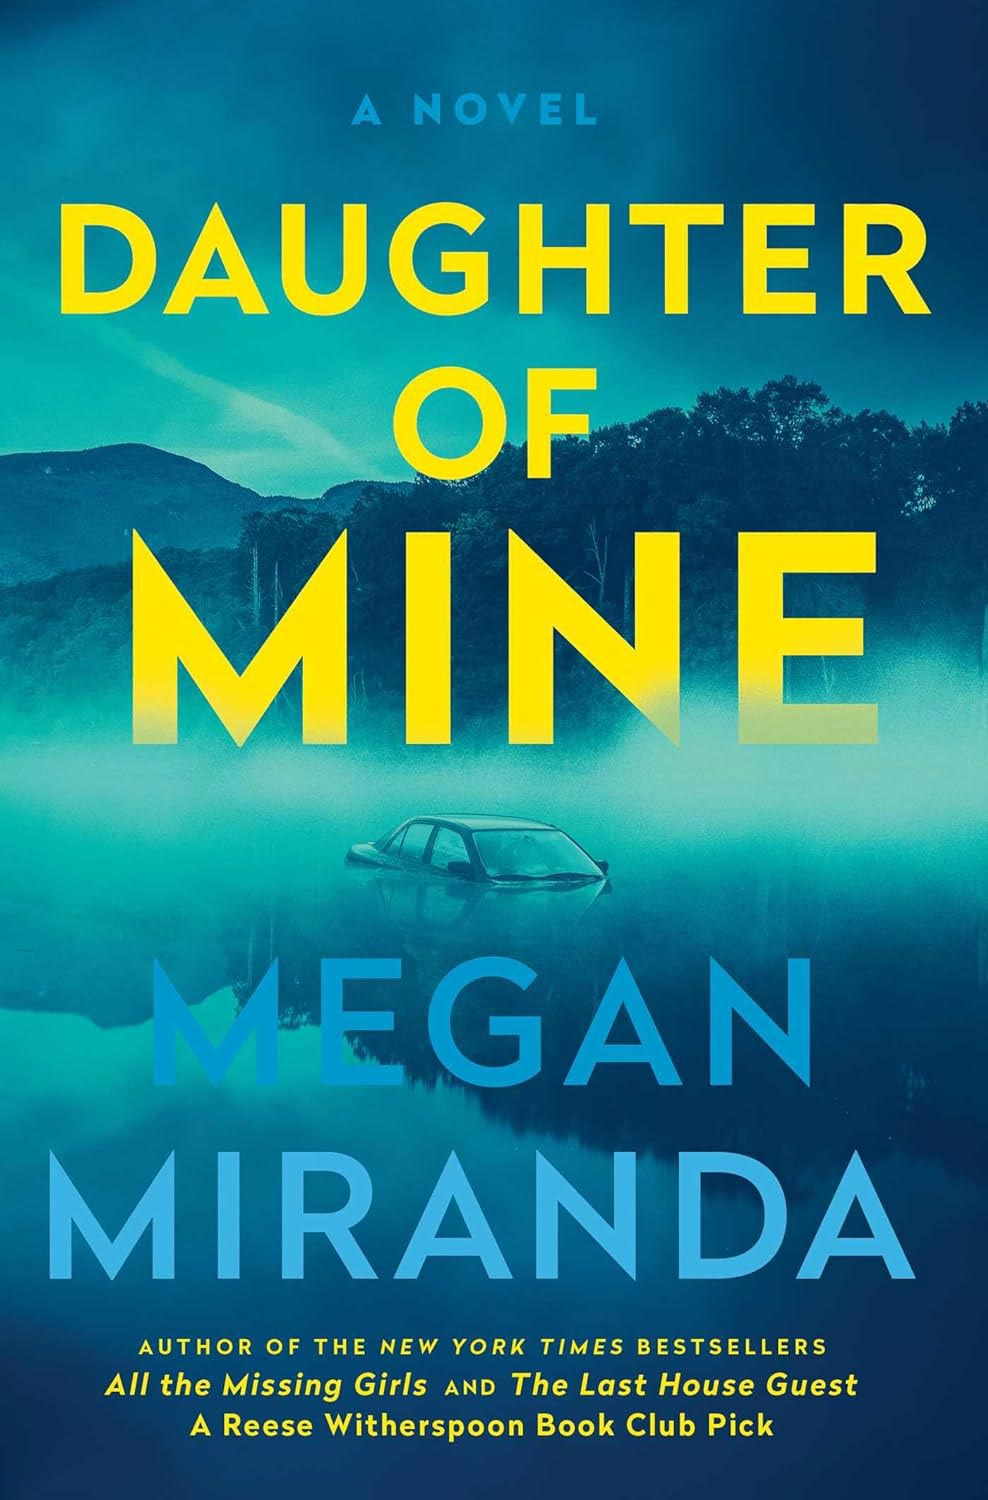 Author Megan Miranda Couldn't Land on a Killer for 'Daughter of Mine’: Book Questions Answered